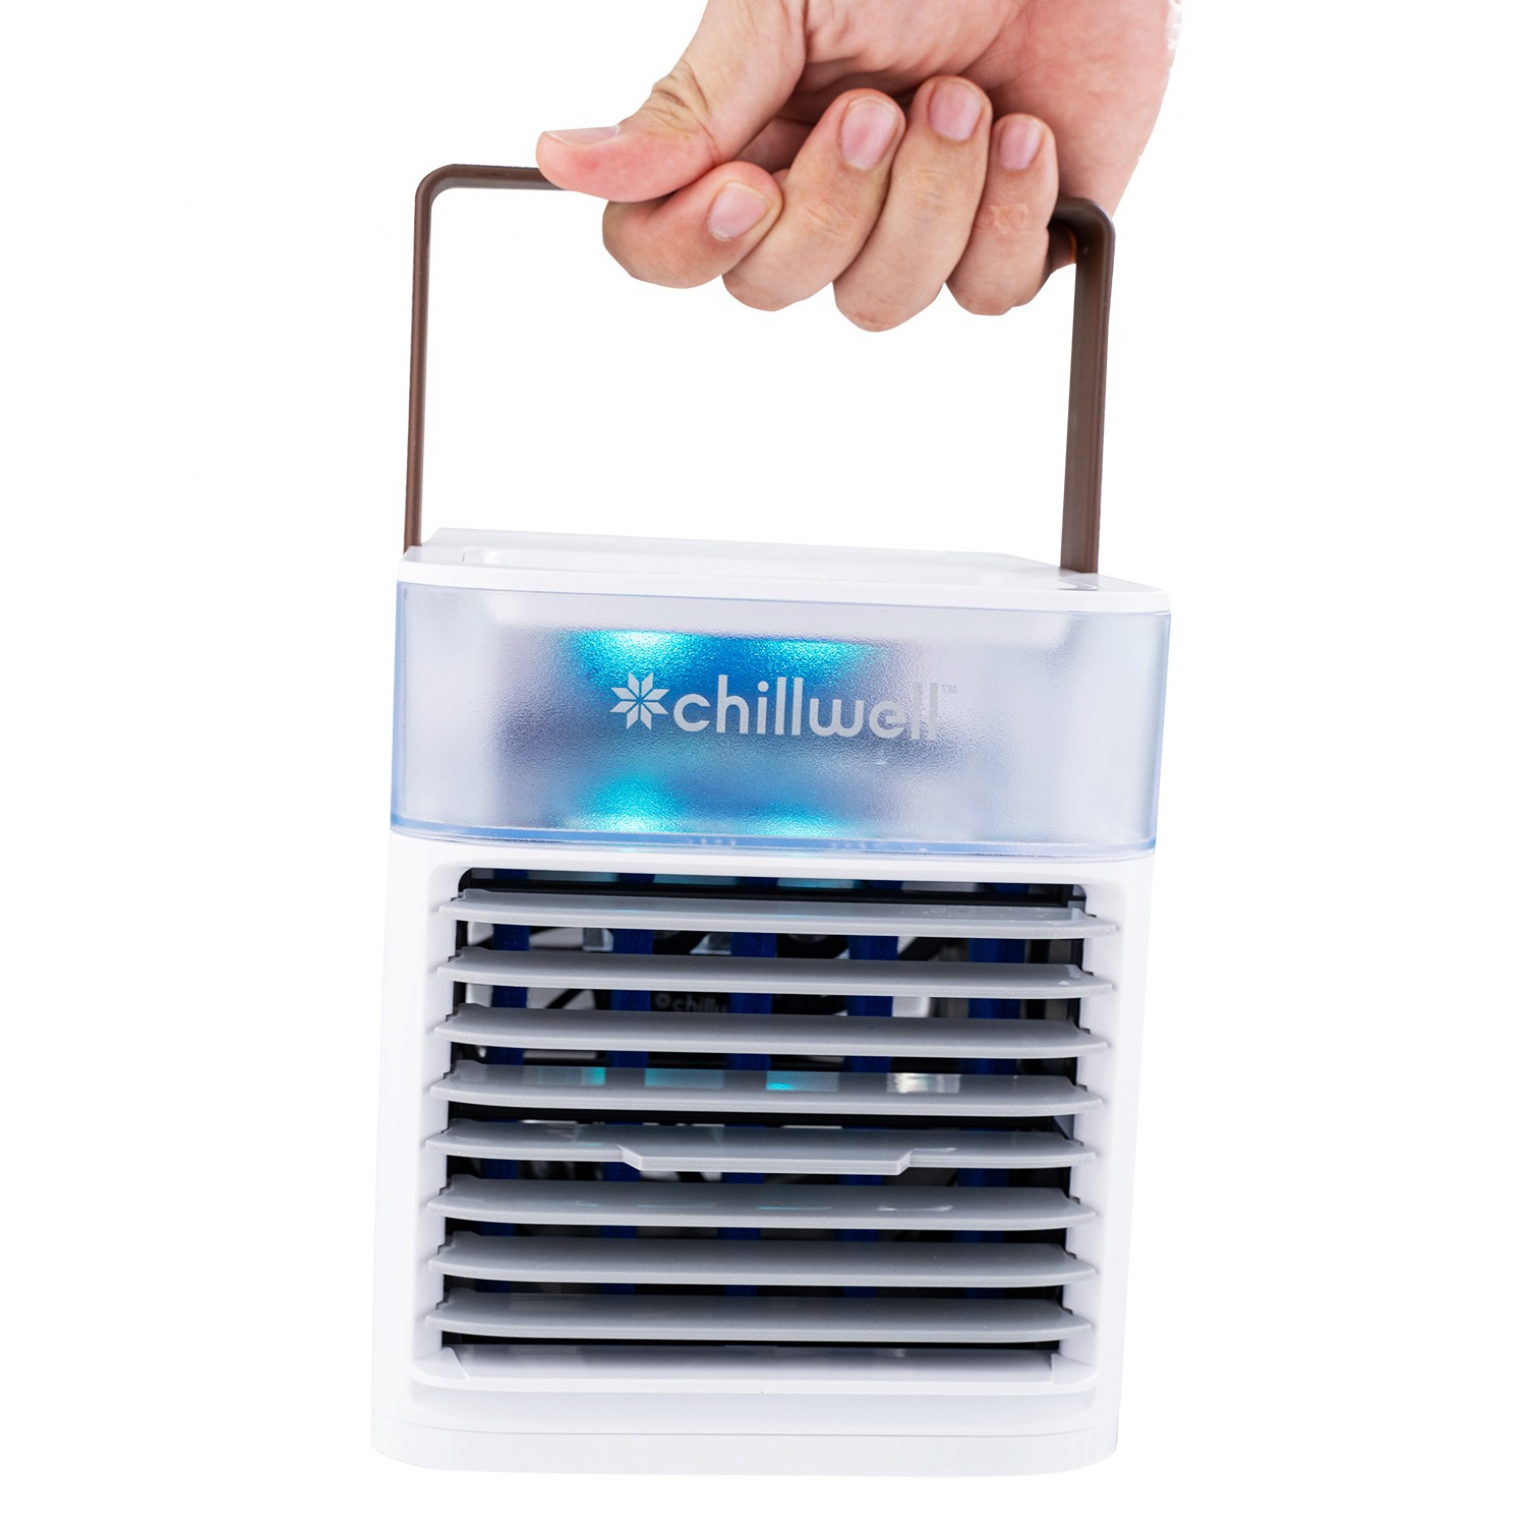 Chillwell AC Discount